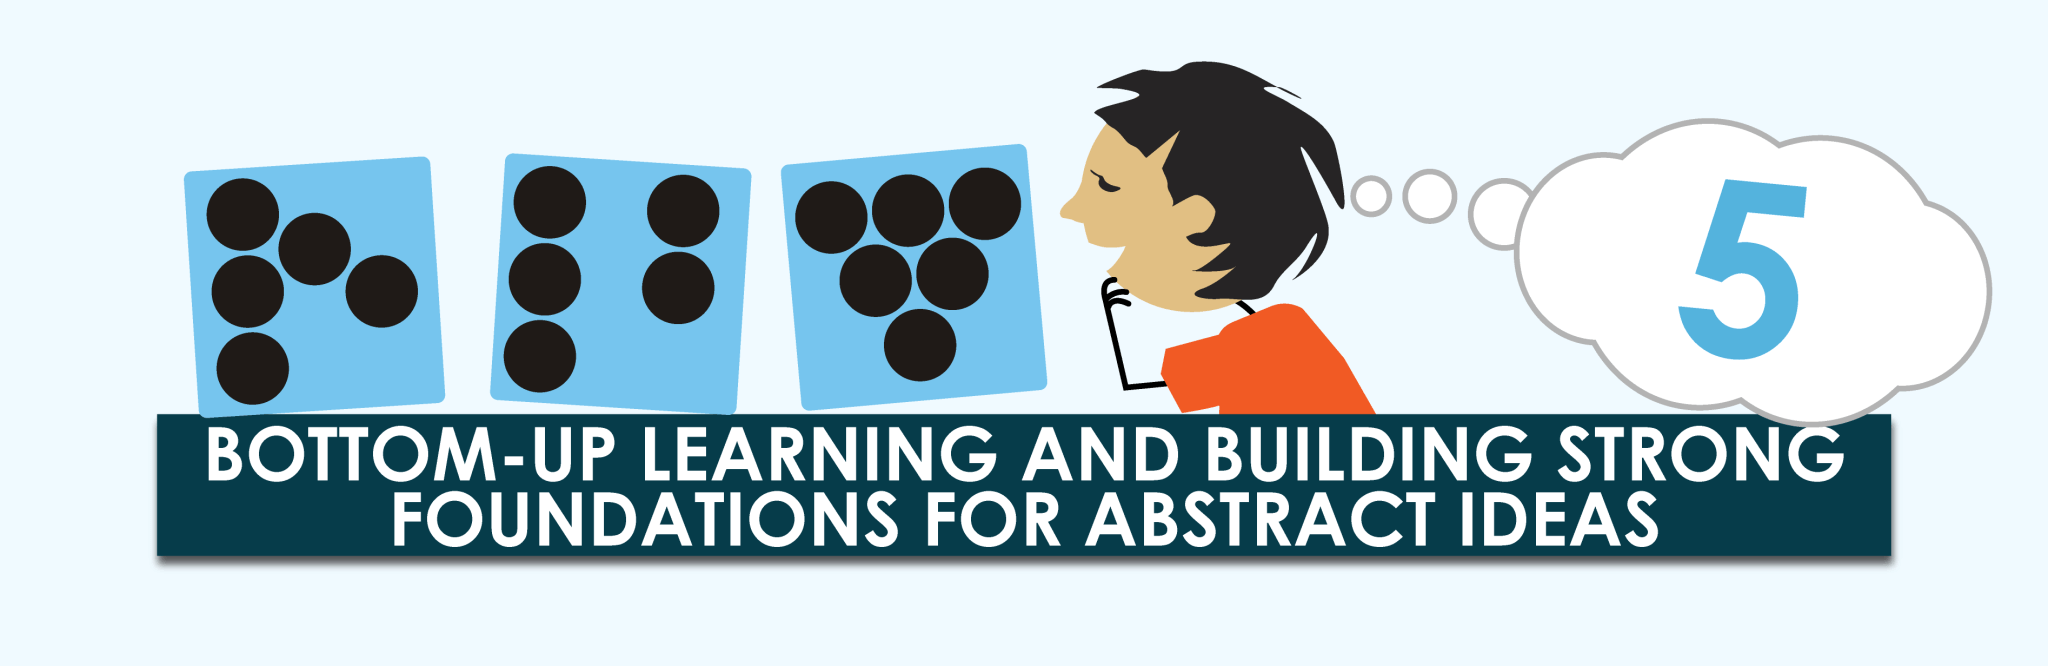 “Bottom-up Learning” and Building Strong Foundations for Abstract Ideas